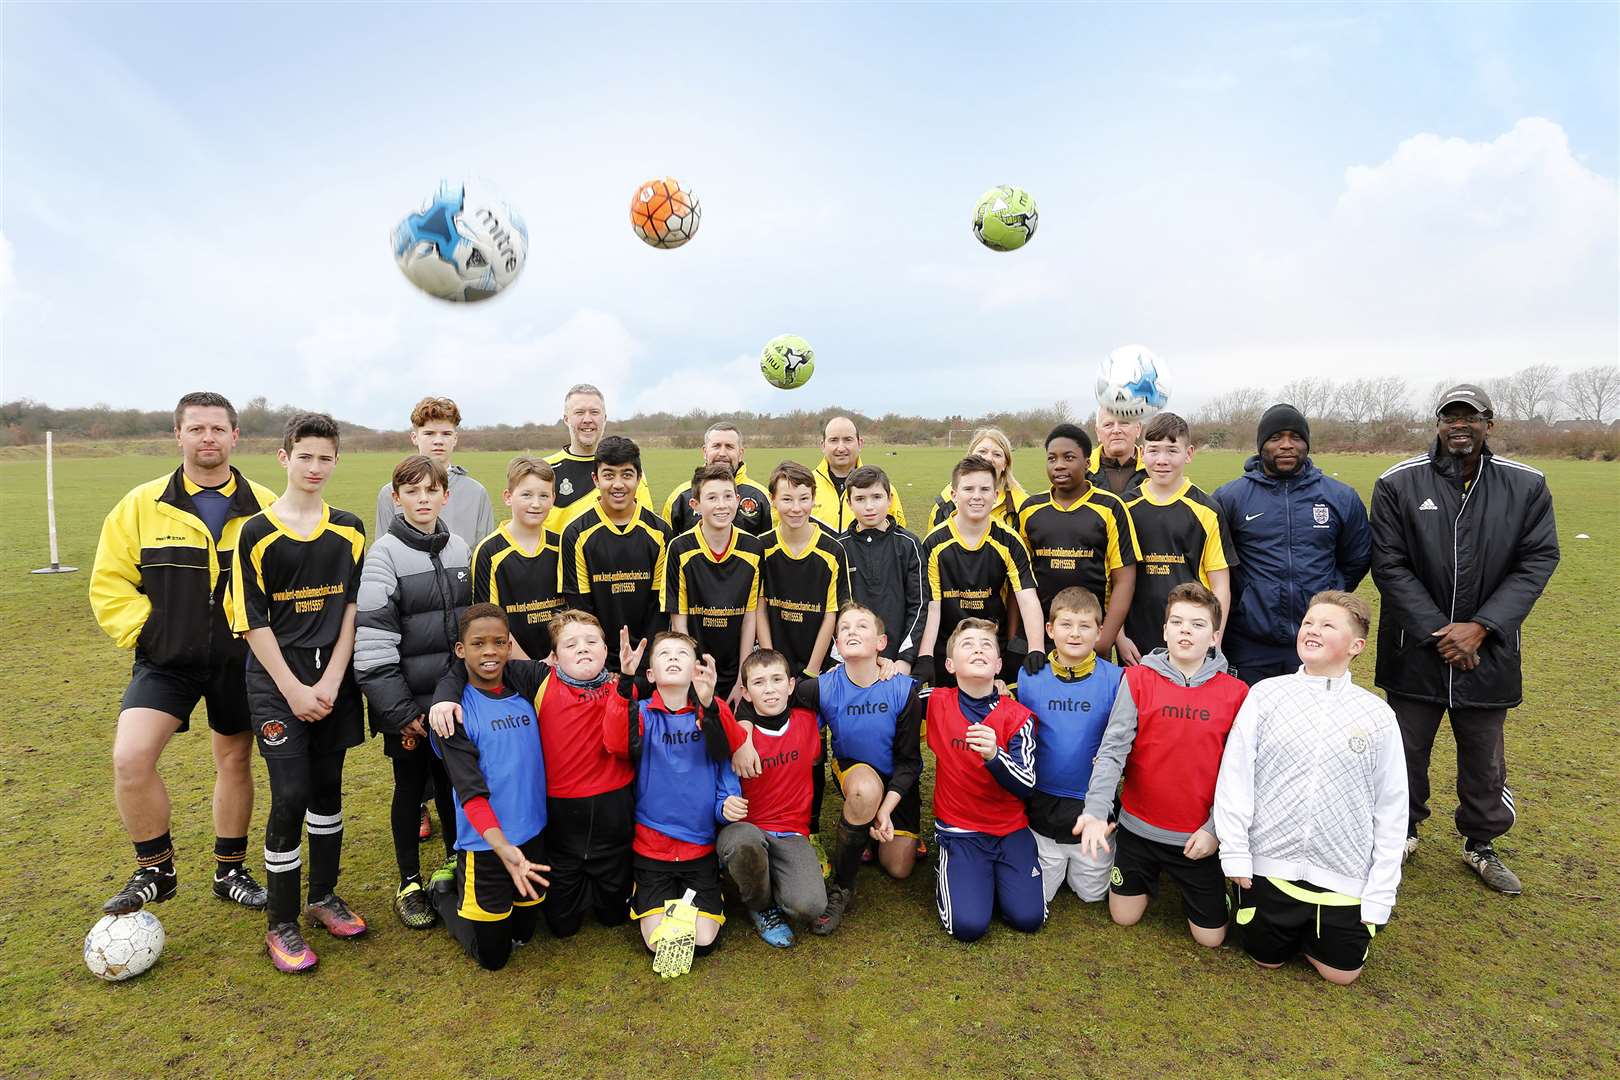 Swanscombe Tigers is being provided with vital training equipment thanks to Barratt Homes